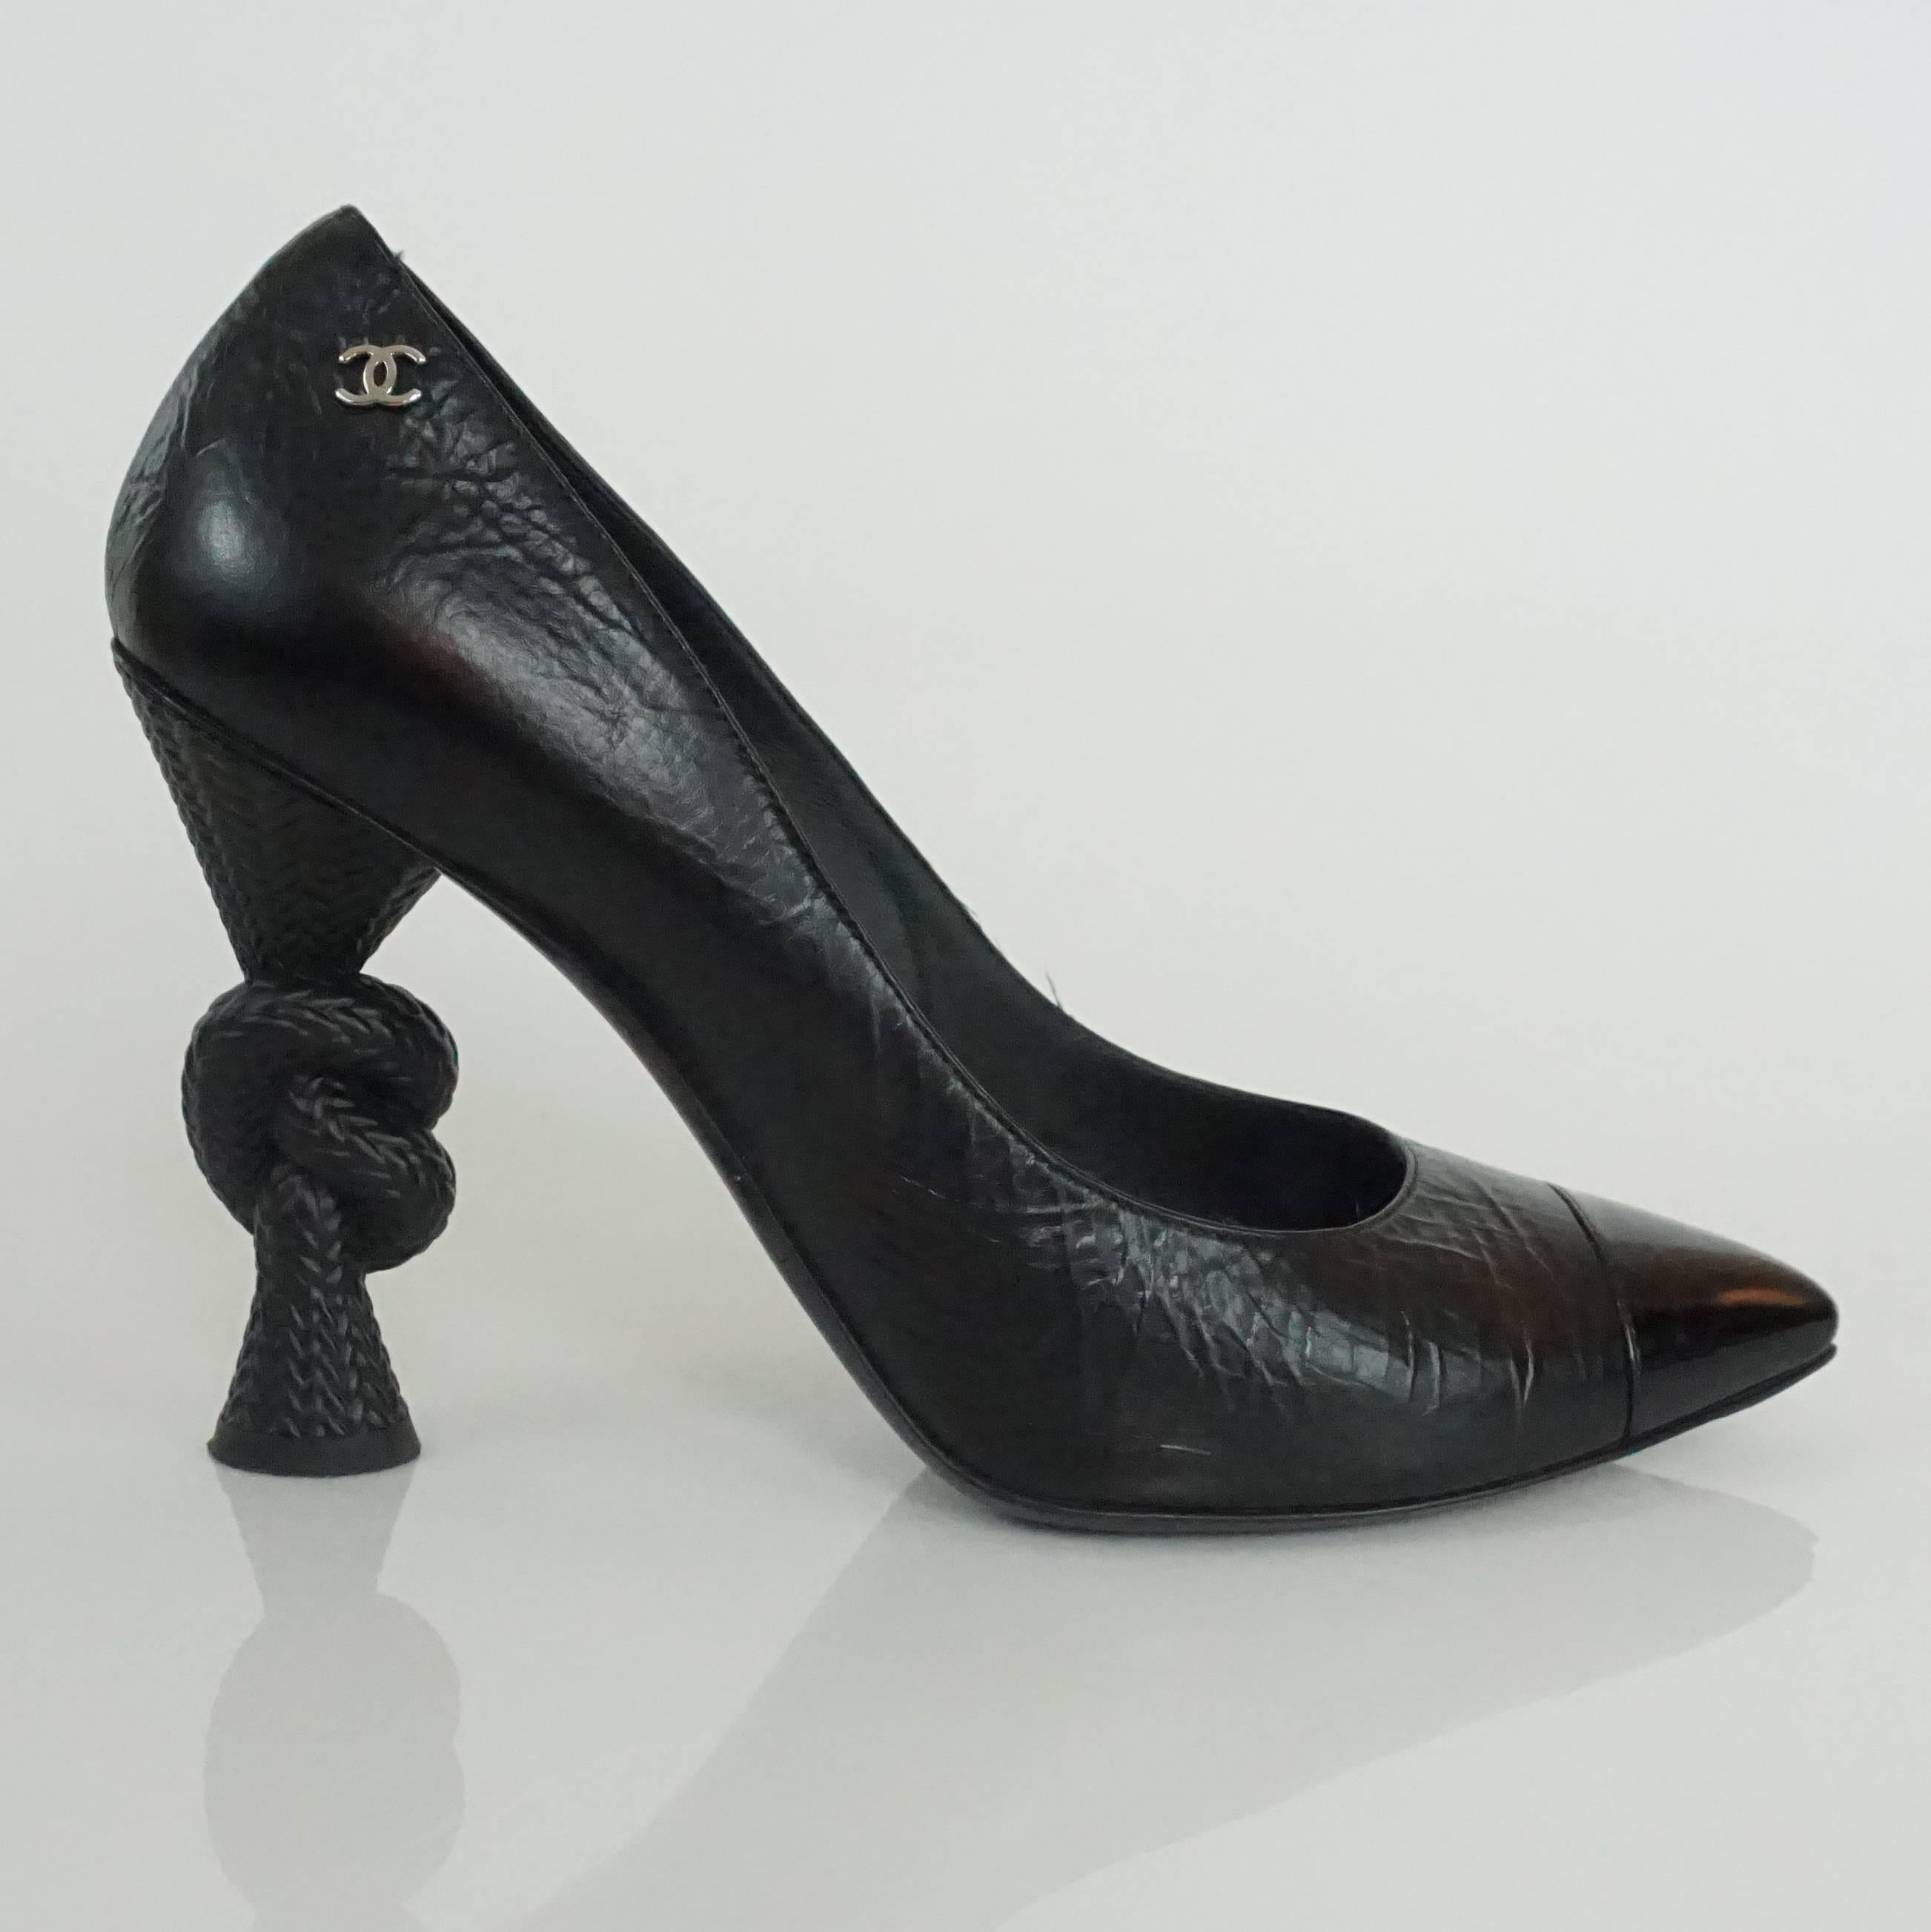 Chanel Black Leather and Patent Pump w/ Rope Heel - 40.5 These spectacular and classy shoes are a distressed leather look with a patent toe, silver cc detail and a rope knot heel. These shoes are in excellent condition.
Heel Height: 4.5